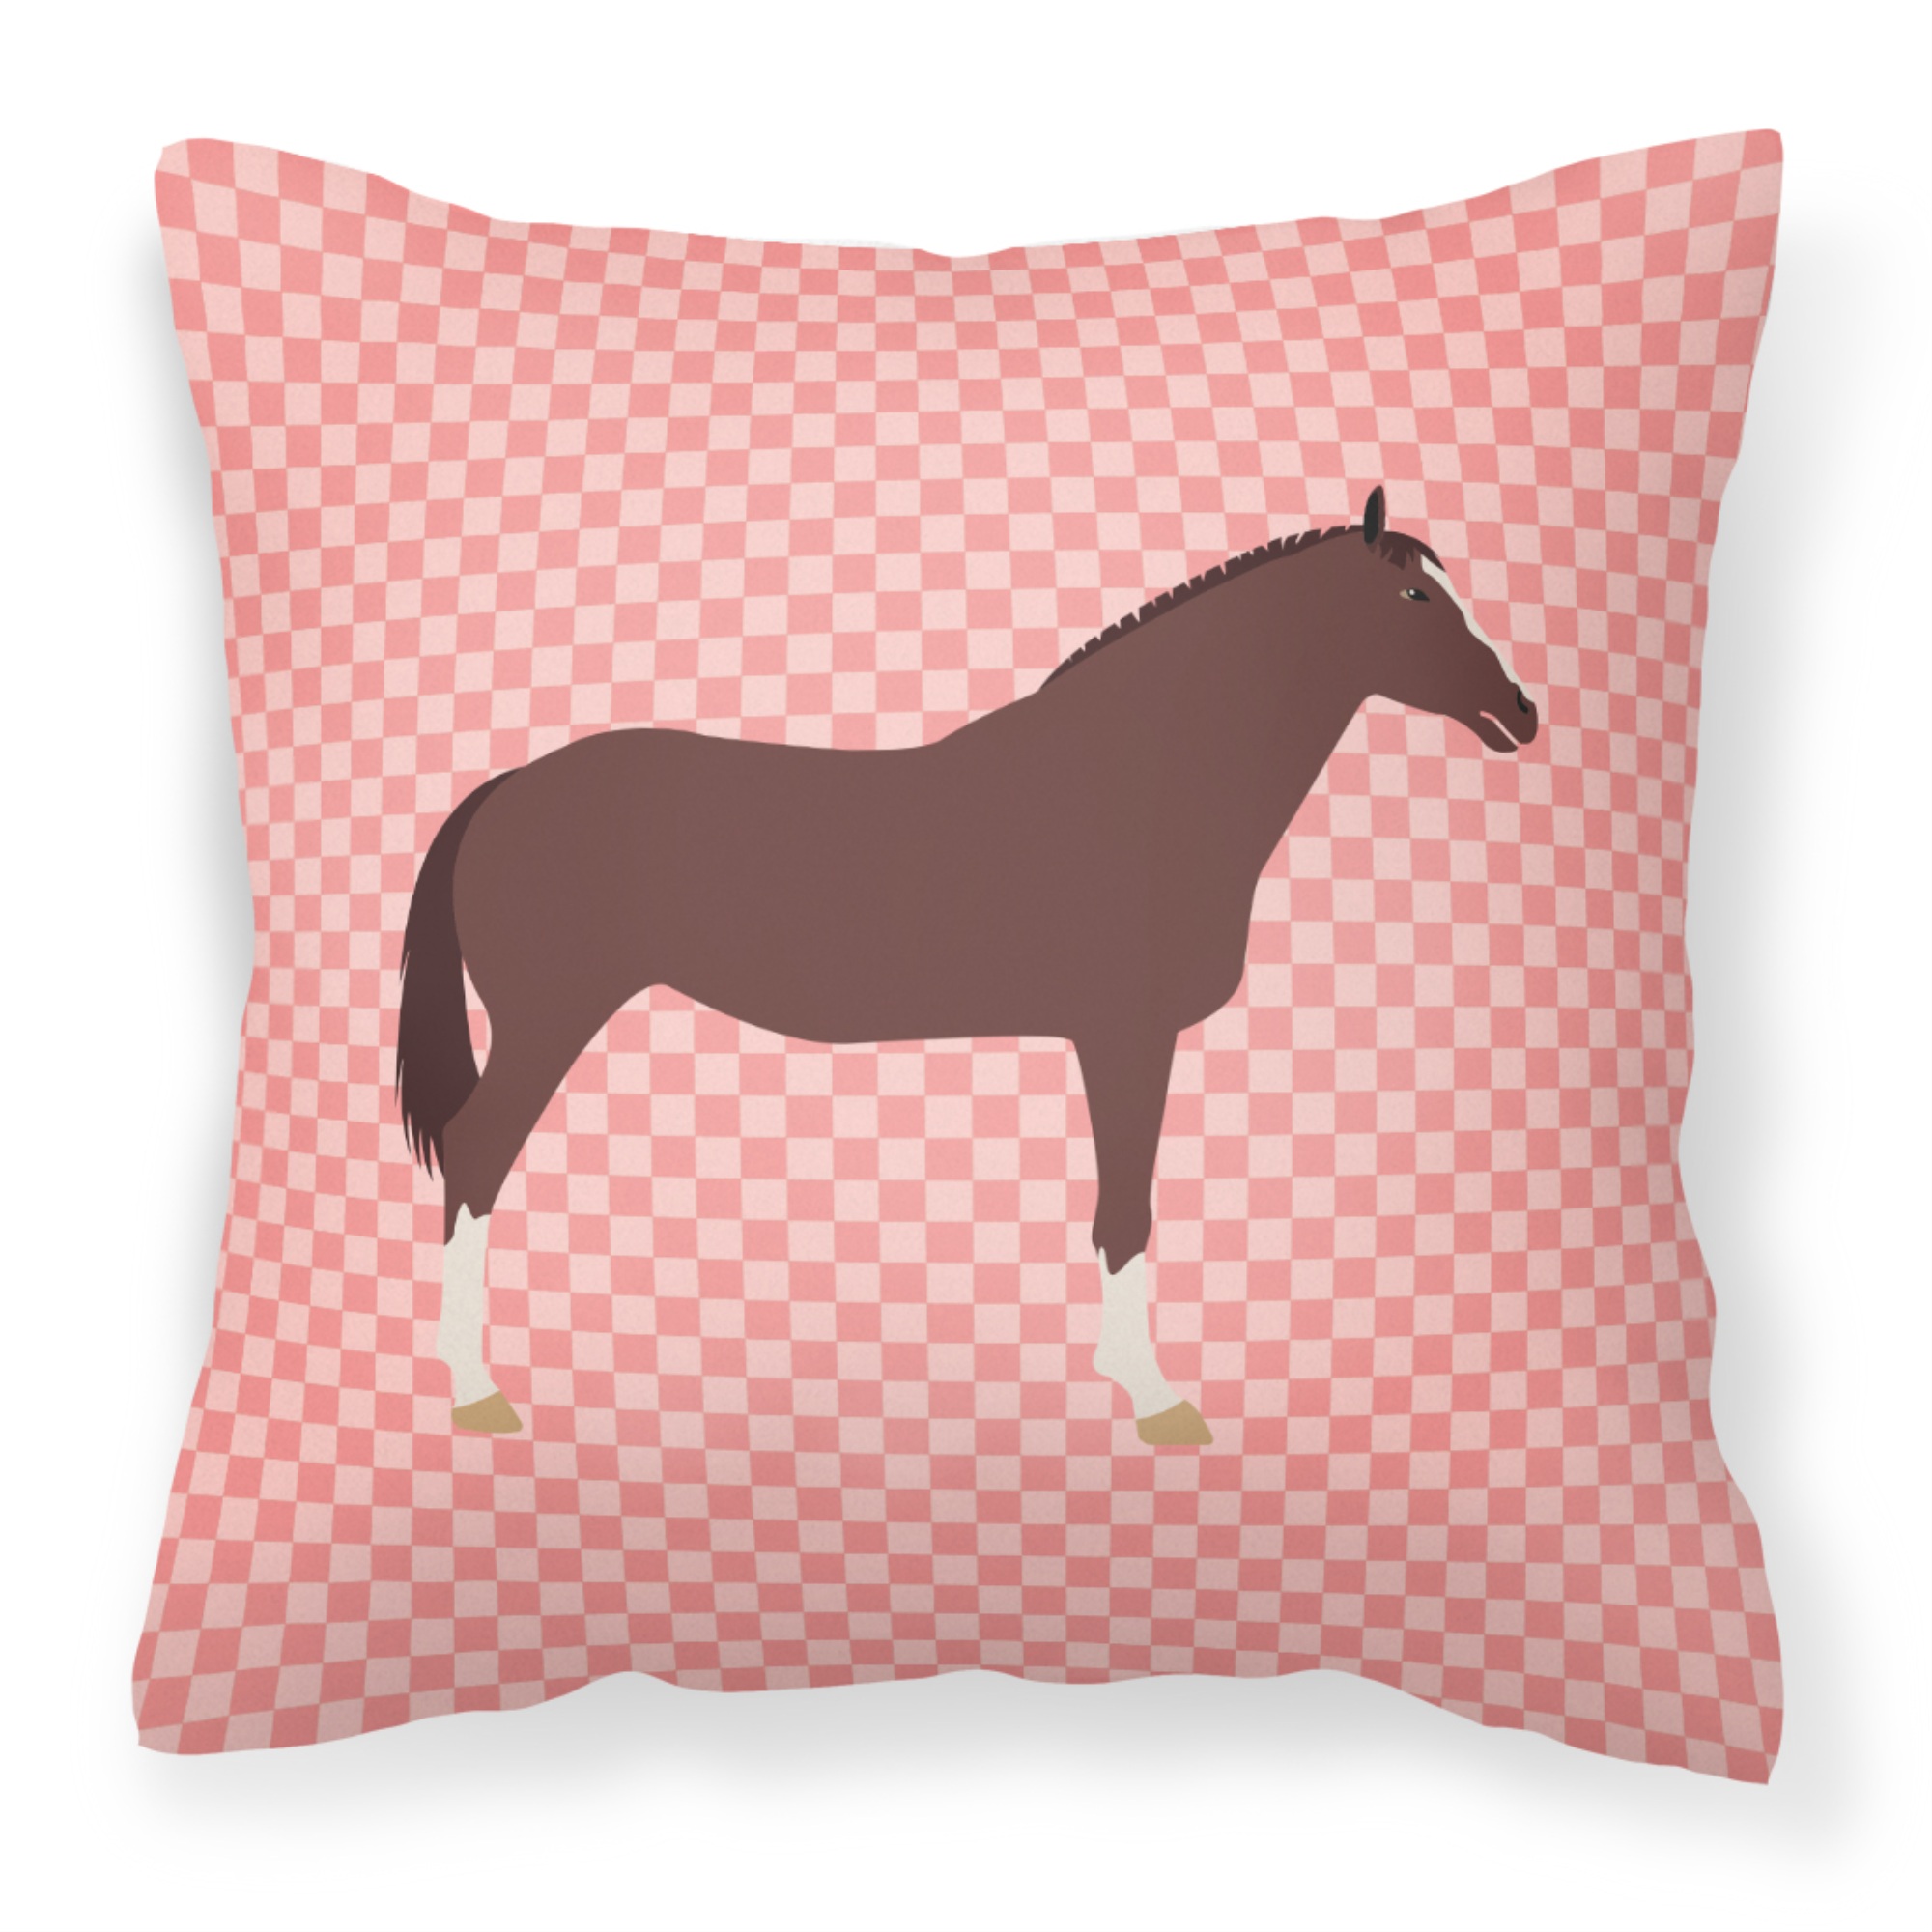 Caroline's Treasures "Caroline's Treasures BB7913PW1818 English Thoroughbred Horse Pink Check Outdoor Canvas Fabric Decorative Pillow, Multicolor"